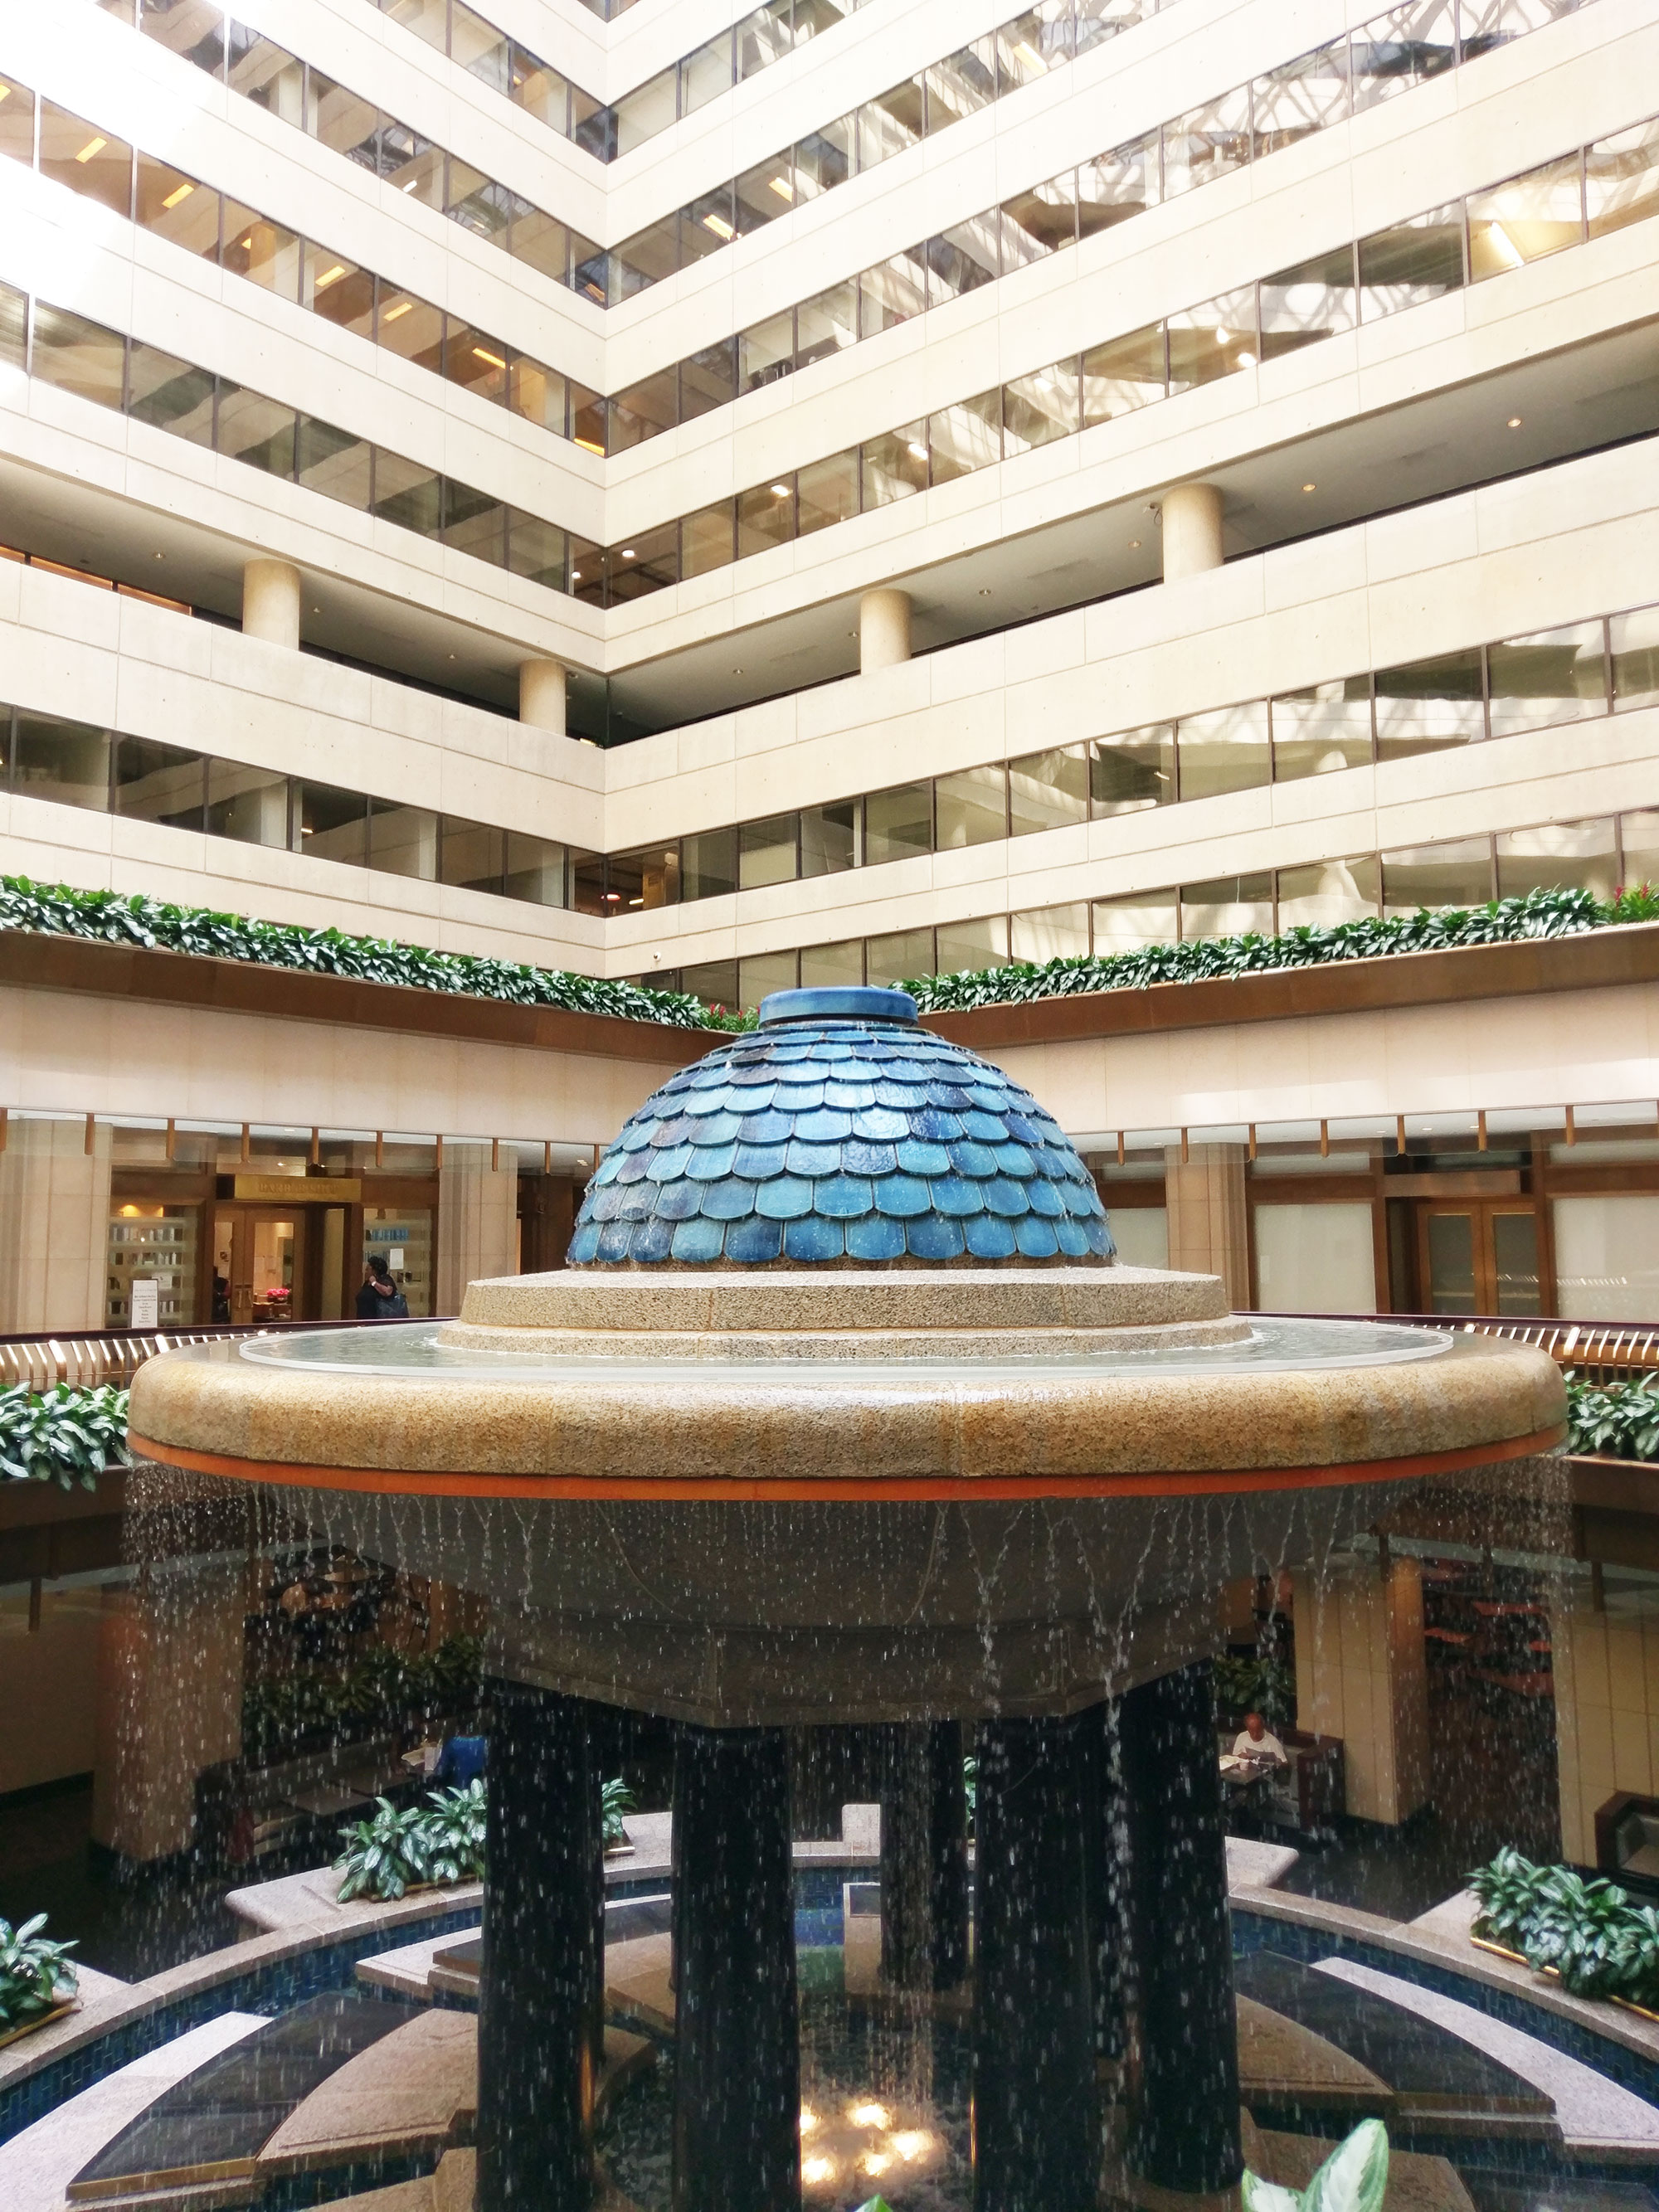 A fountain in the inner courtyard of an office building in downtown Washington D.C.